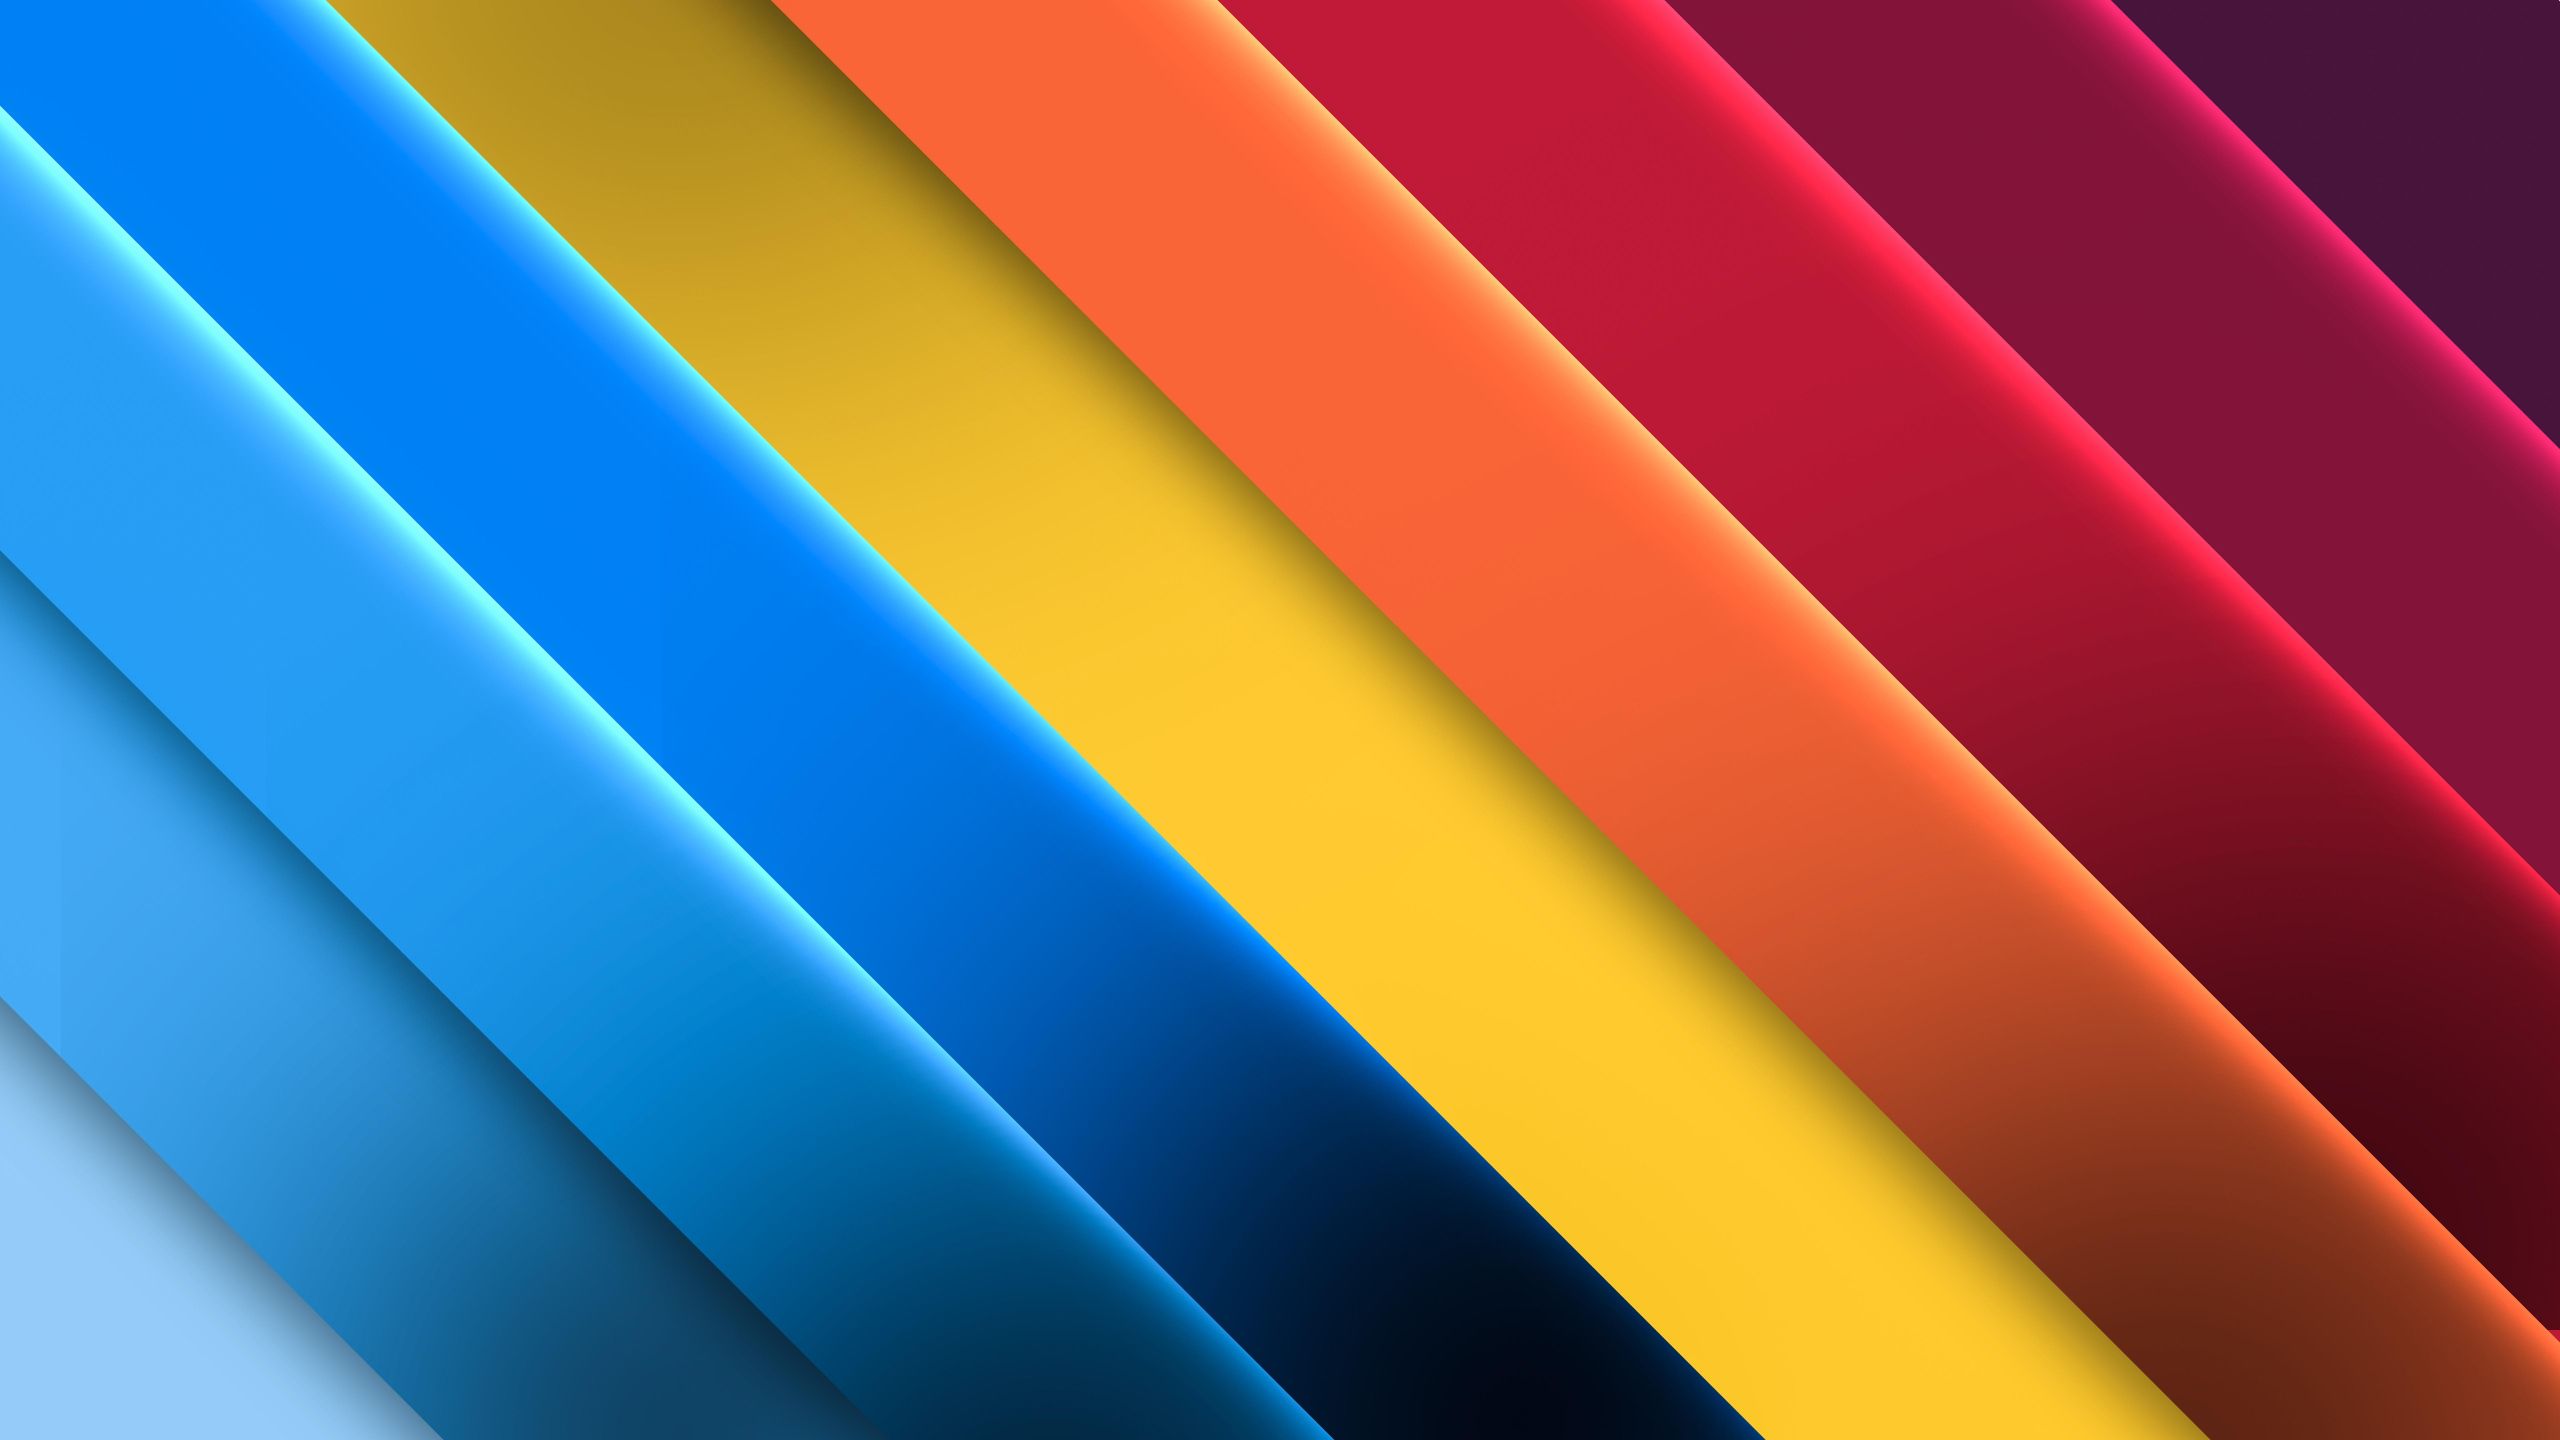 Simple Bands Wallpaper In 2560x1440 Resolution